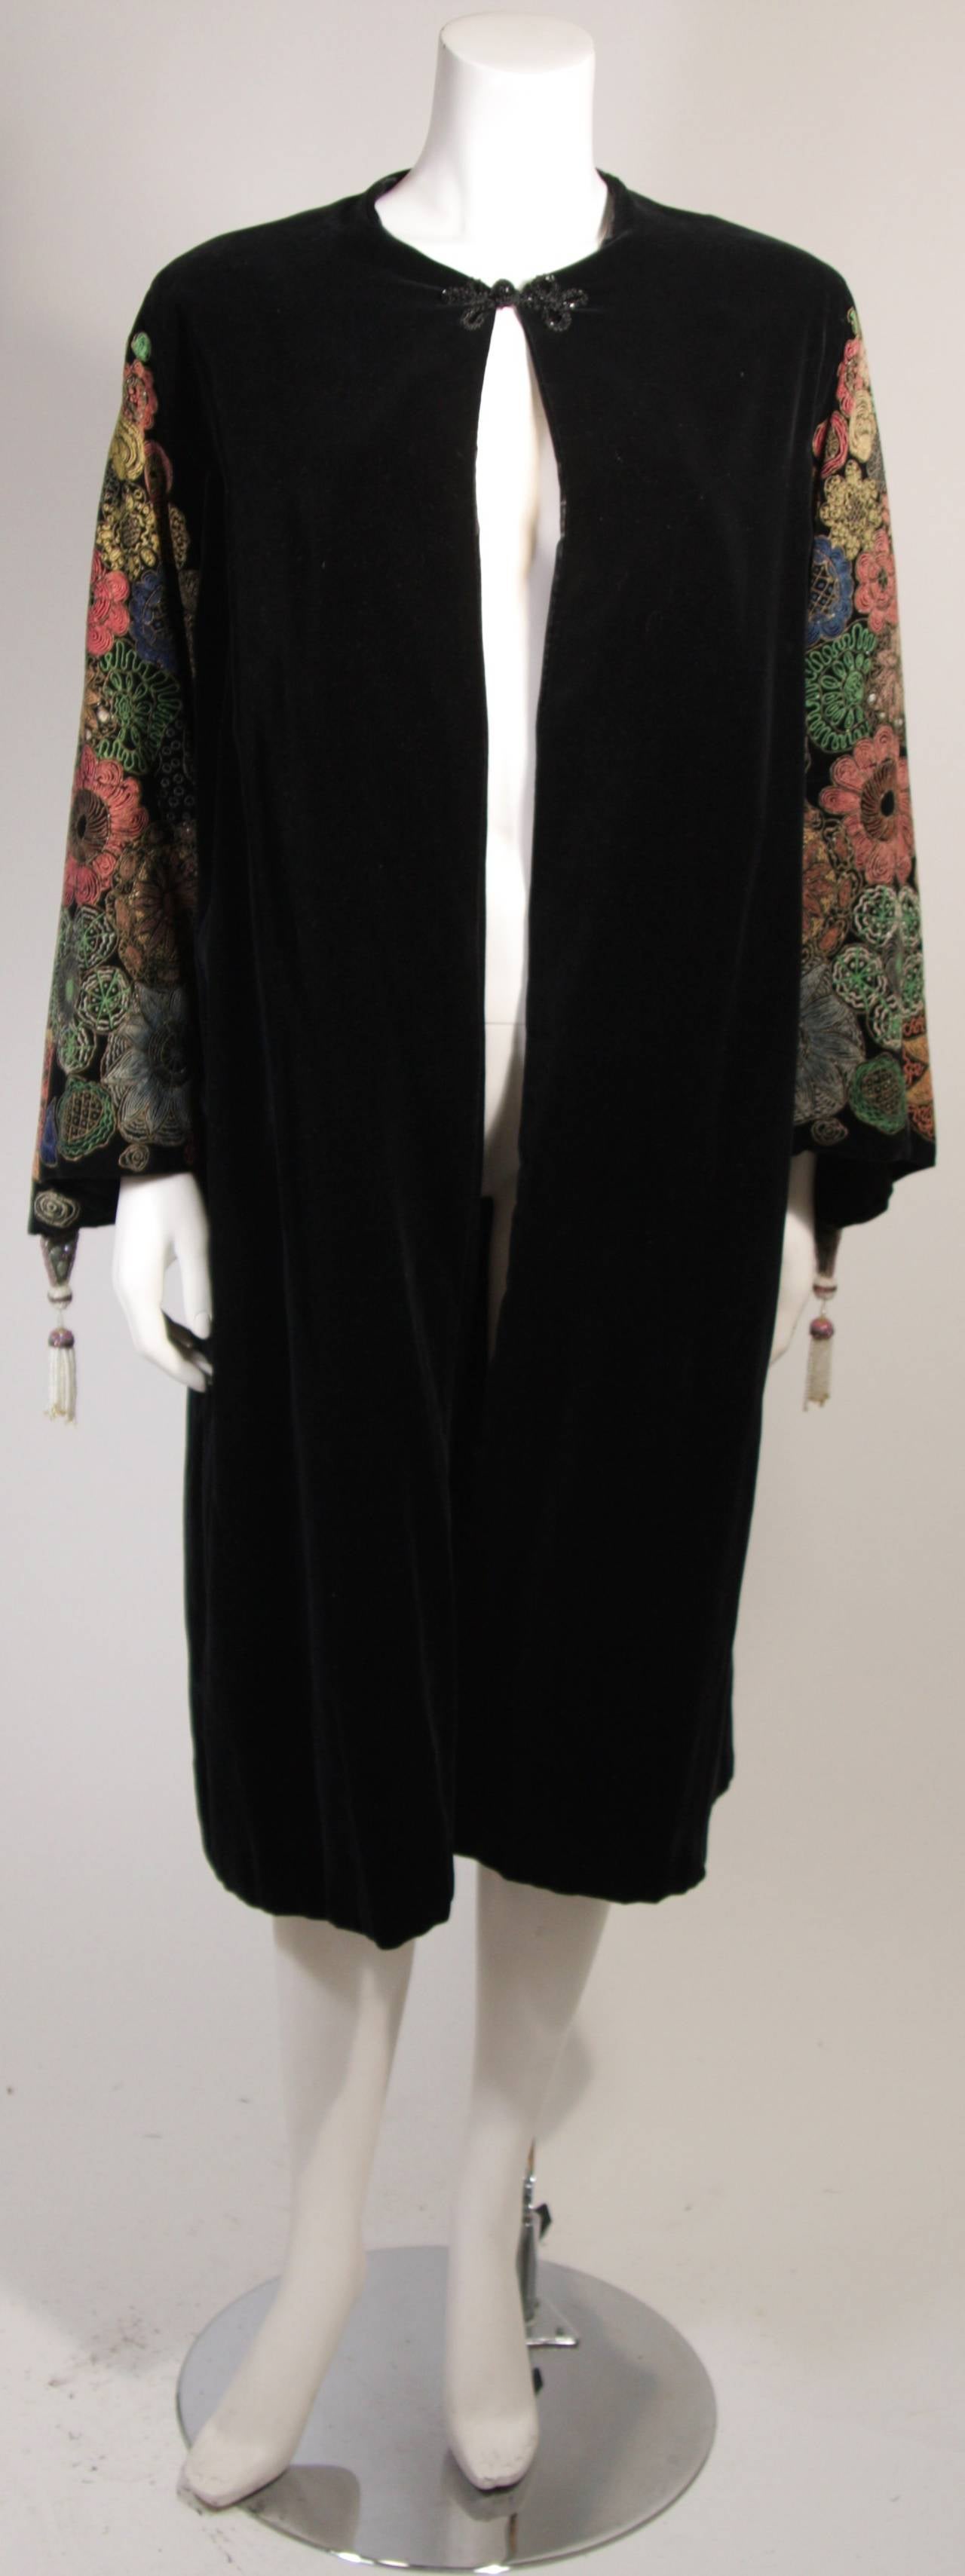 This is a black velvet coat. The coat features hand painted bell style sleeves adorned with a tassel. Features a beaded toggle neck closure. Velvet lined with silk. Circa 1930's.

Measures (Approximately)
Length: 44